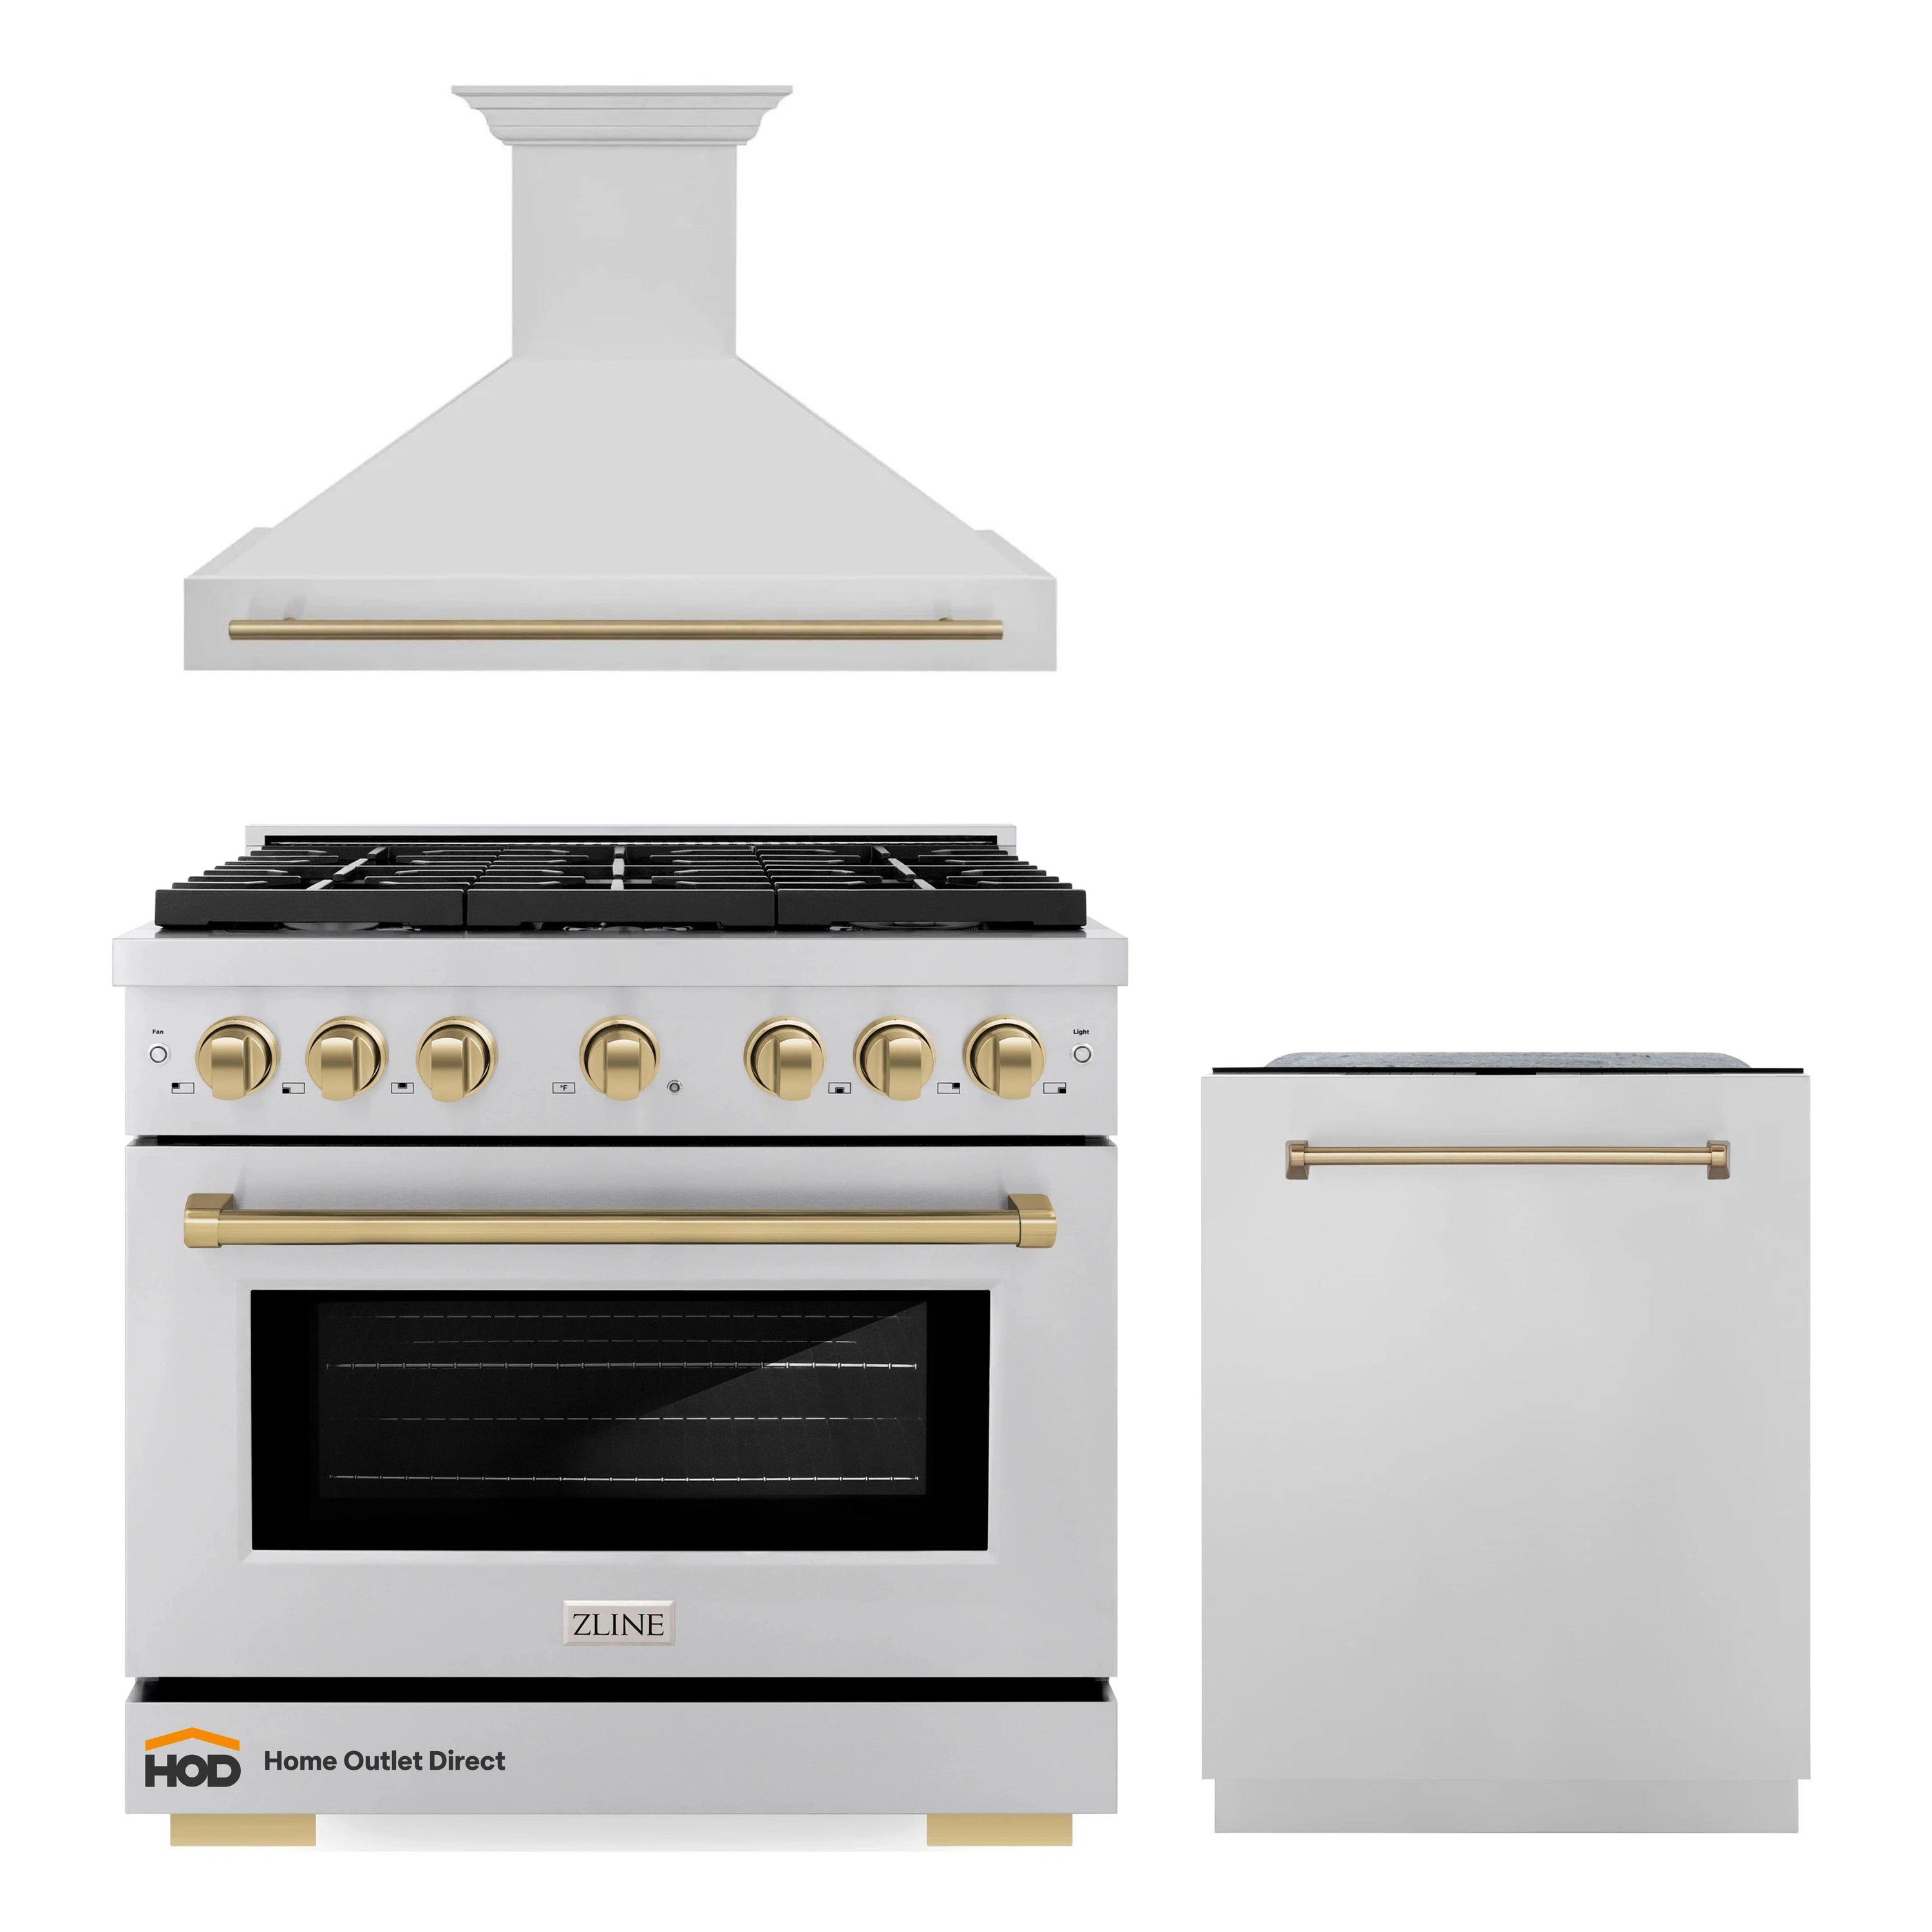 ZLINE Autograph Edition 3-Piece Appliance Package - 36-Inch Gas Range, Wall Mounted Range Hood, & 24-Inch Tall Tub Dishwasher in Stainless Steel with Champagne Bronze Trim (3AKP-RGRHDWM36-CB)